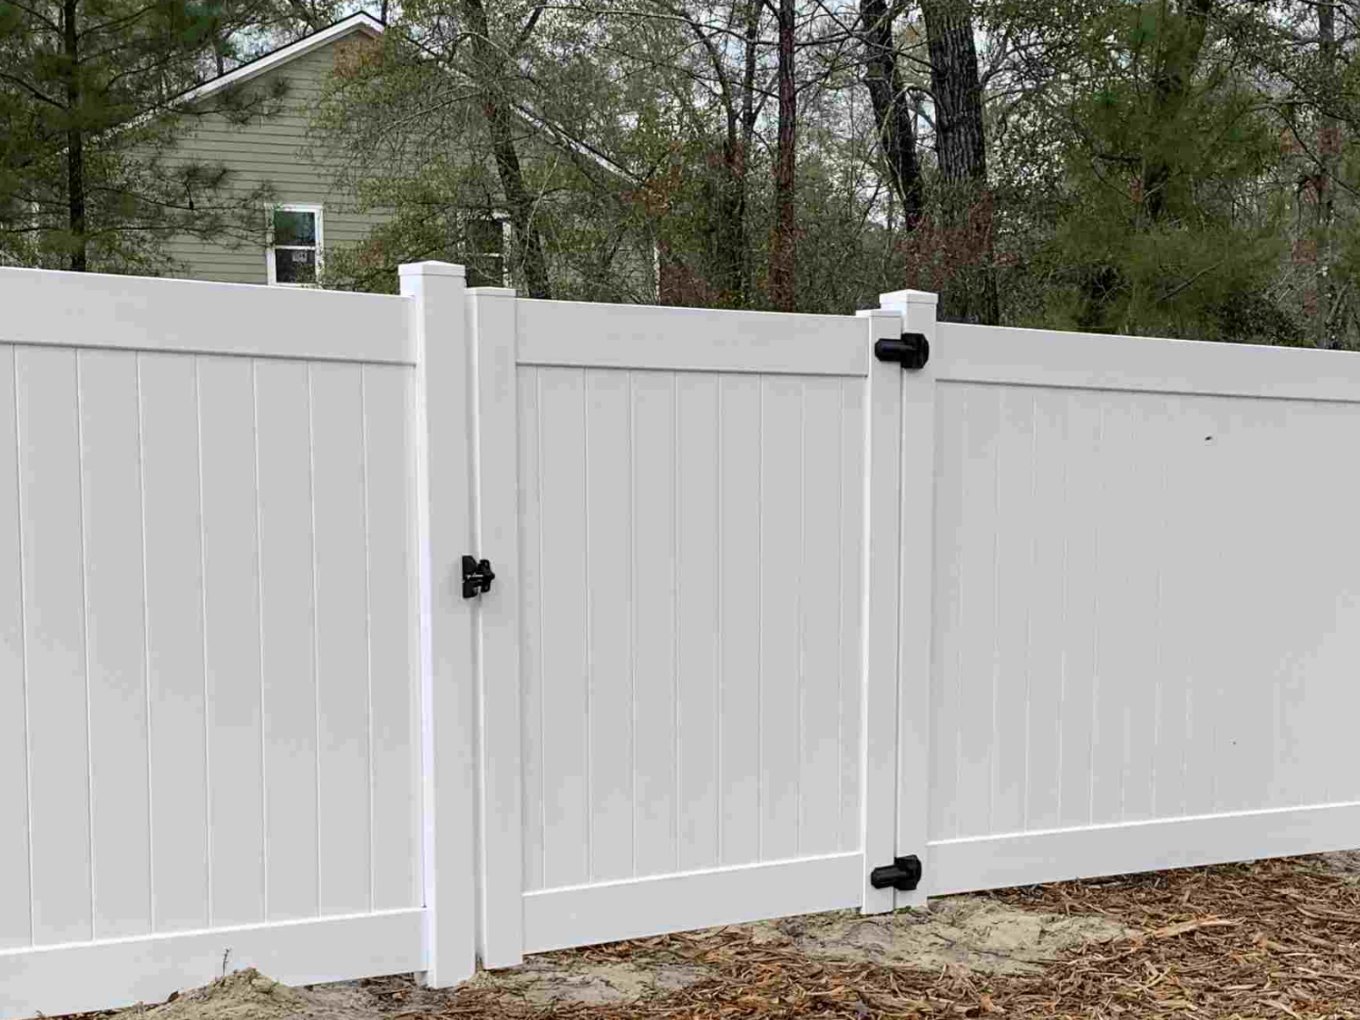 Cayce South Carolina residential fencing contractor